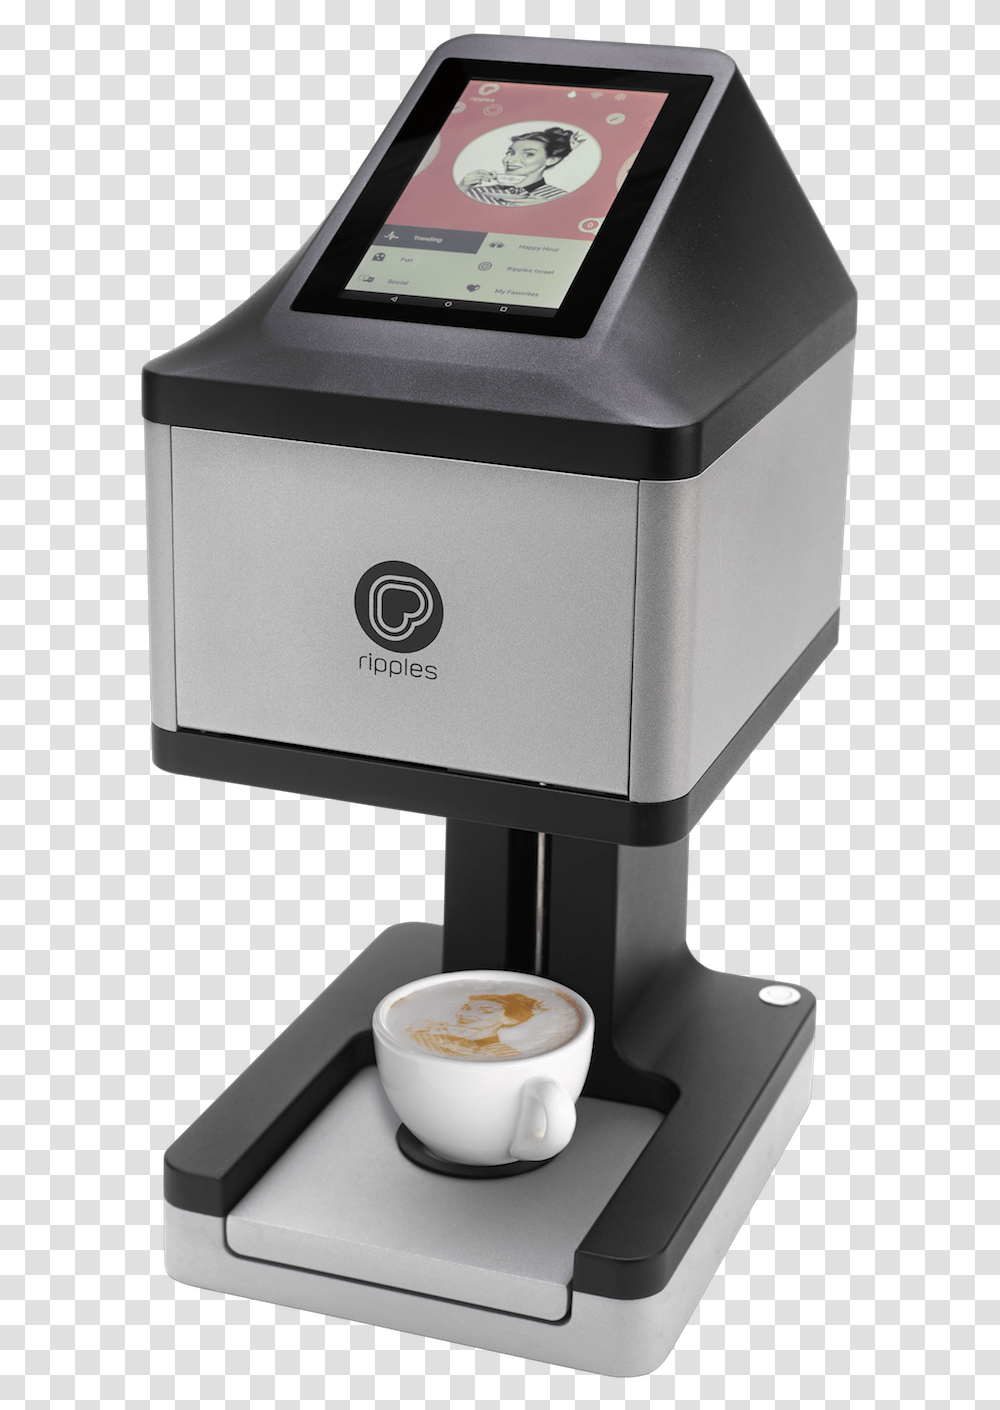 Ripples, Mailbox, Coffee Cup, Machine, Appliance Transparent Png